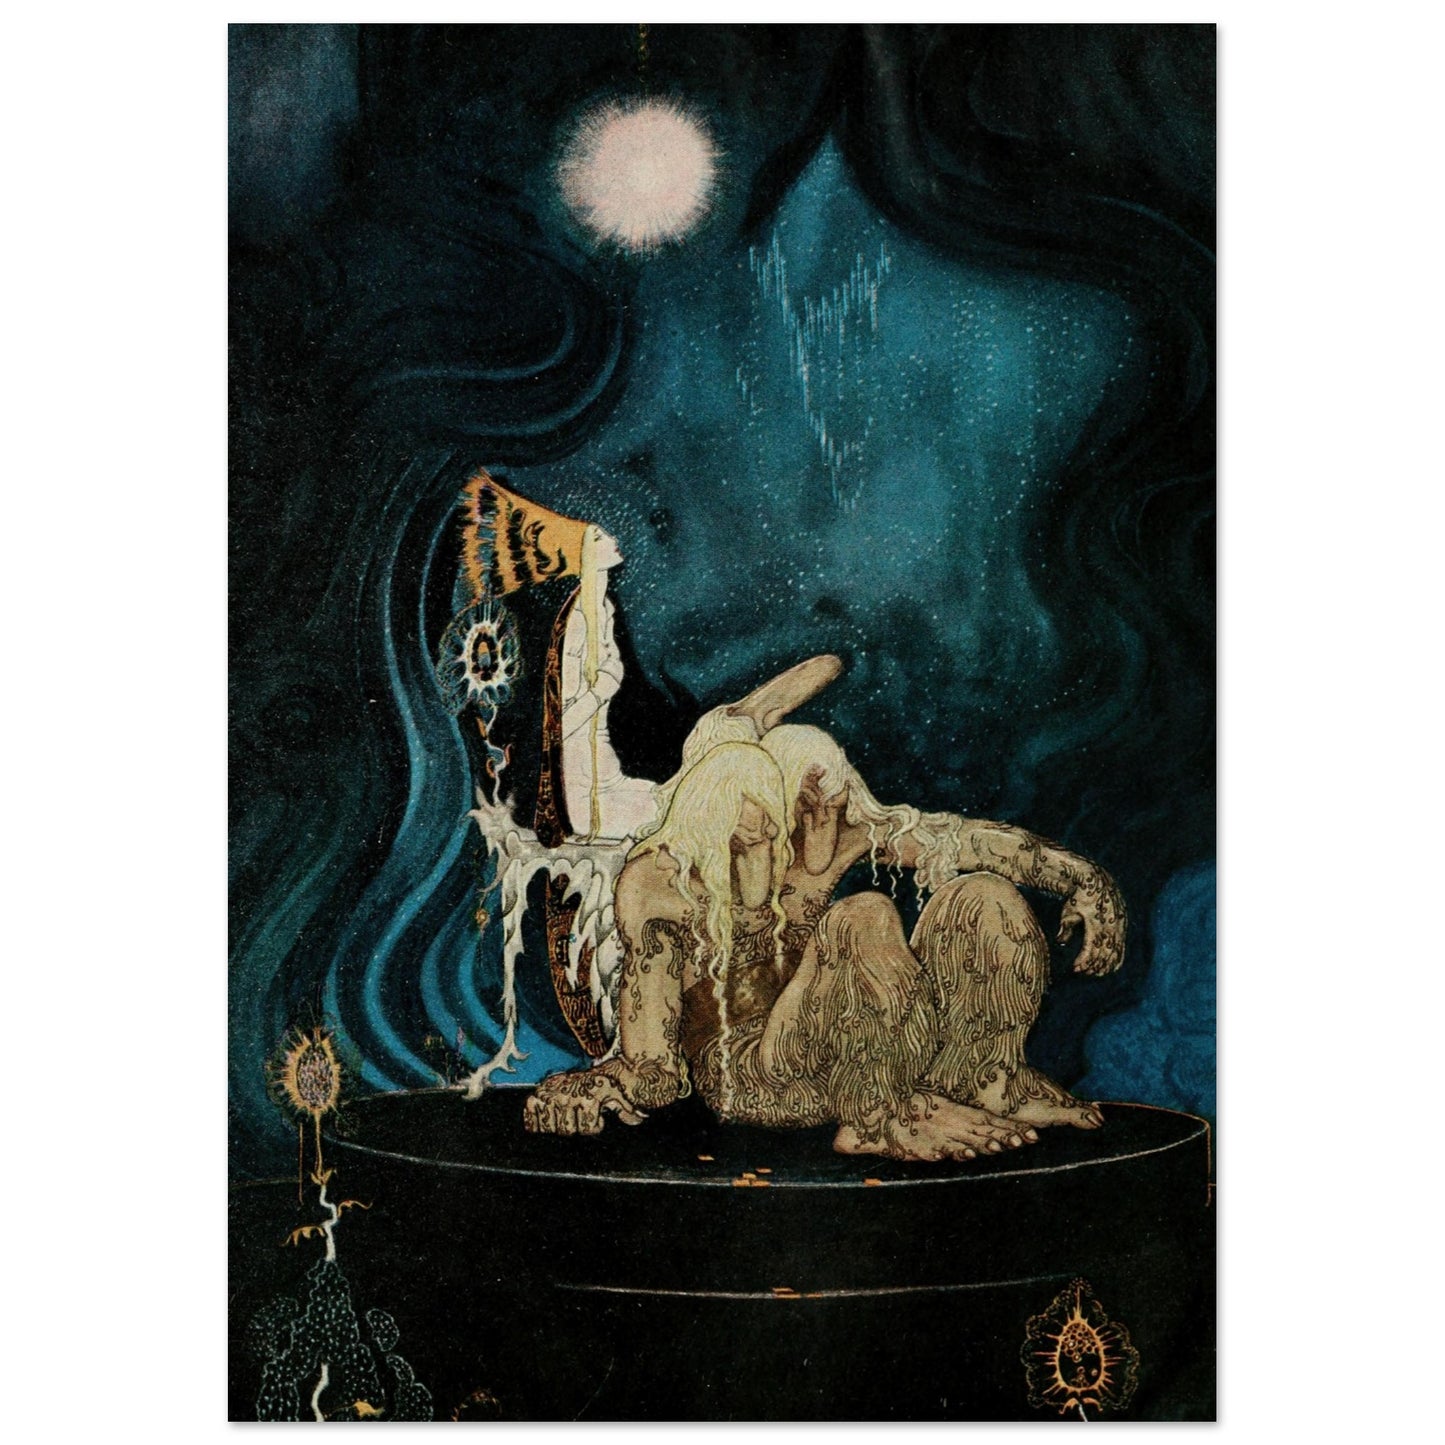 KAY RASMUS NIELSEN - EAST OF THE SUN AND WEST OF THE MOON PL 23 (1922) 